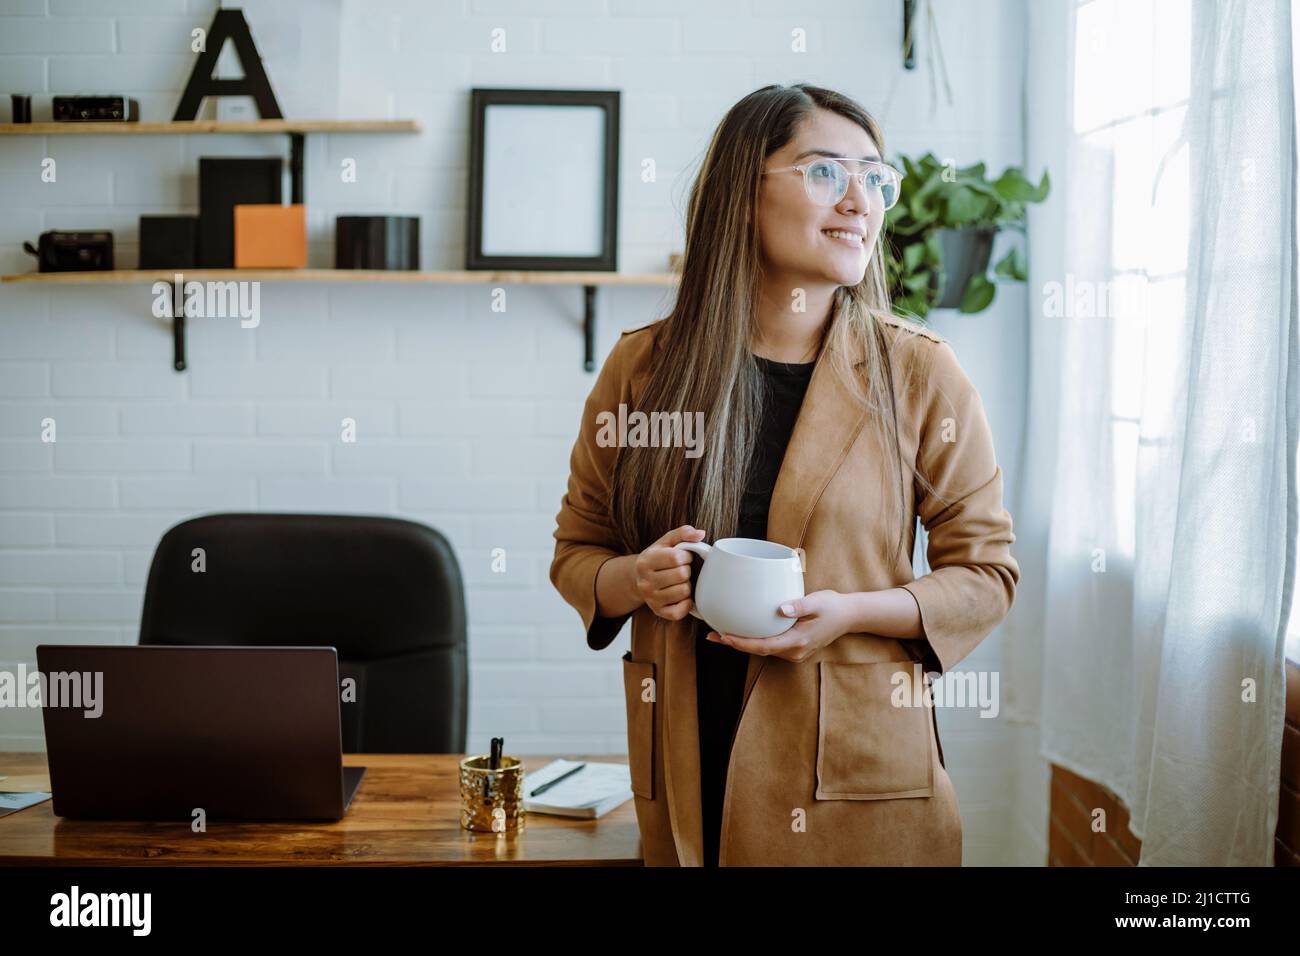 Mexican young woman drinks from a white cup with natural pose in her home office Stock Photo